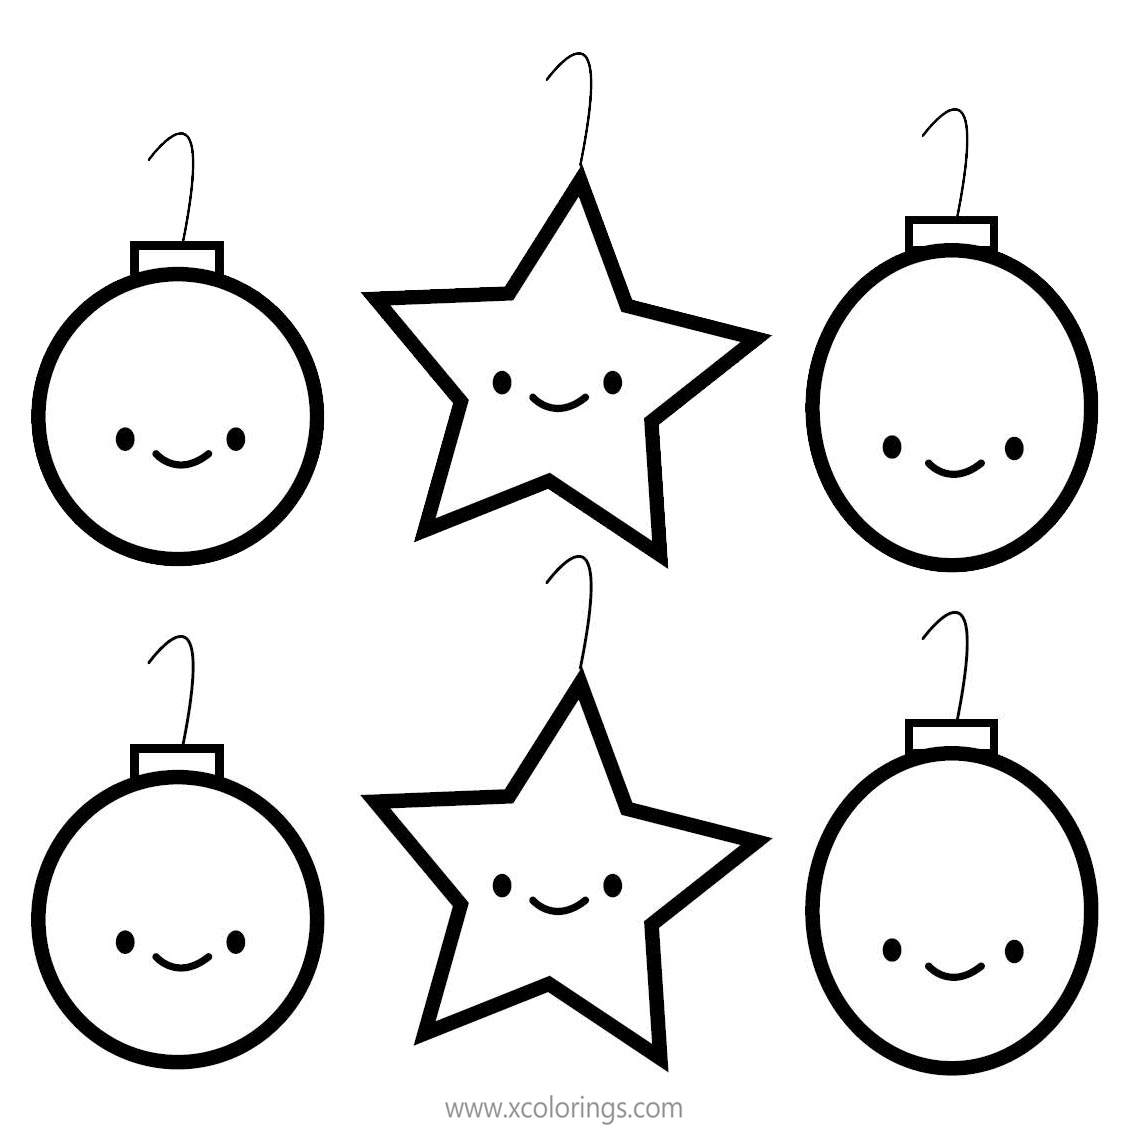 Free Cute Cartoon Christmas Ornament Coloring Pages printable